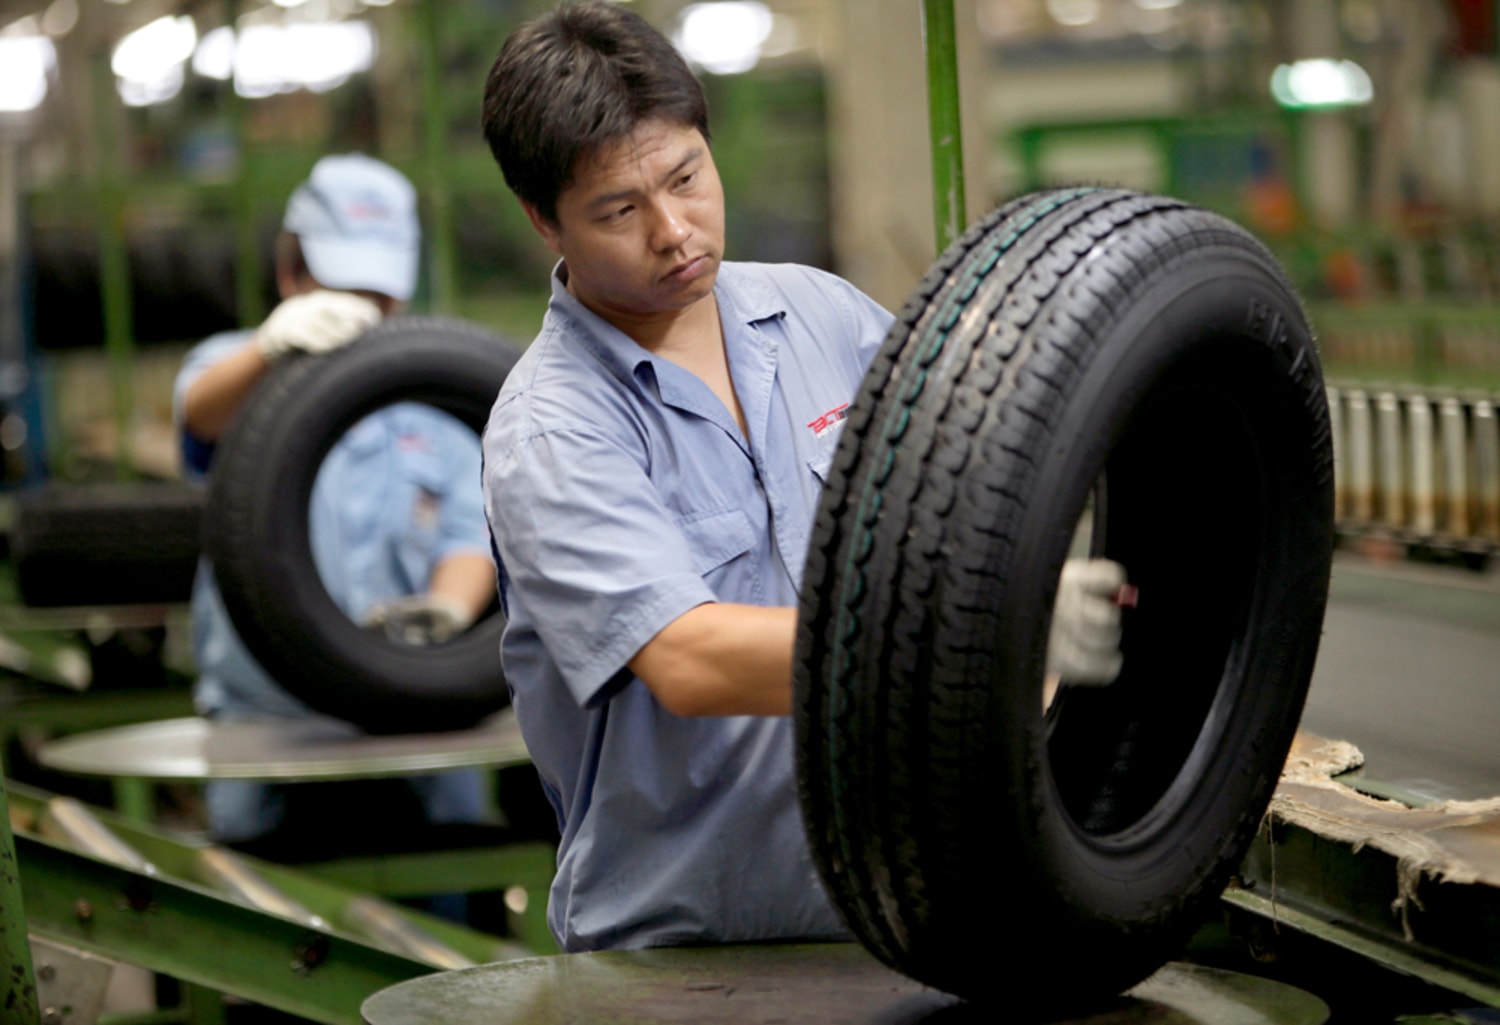 With Chinese tires, it's buyer beware